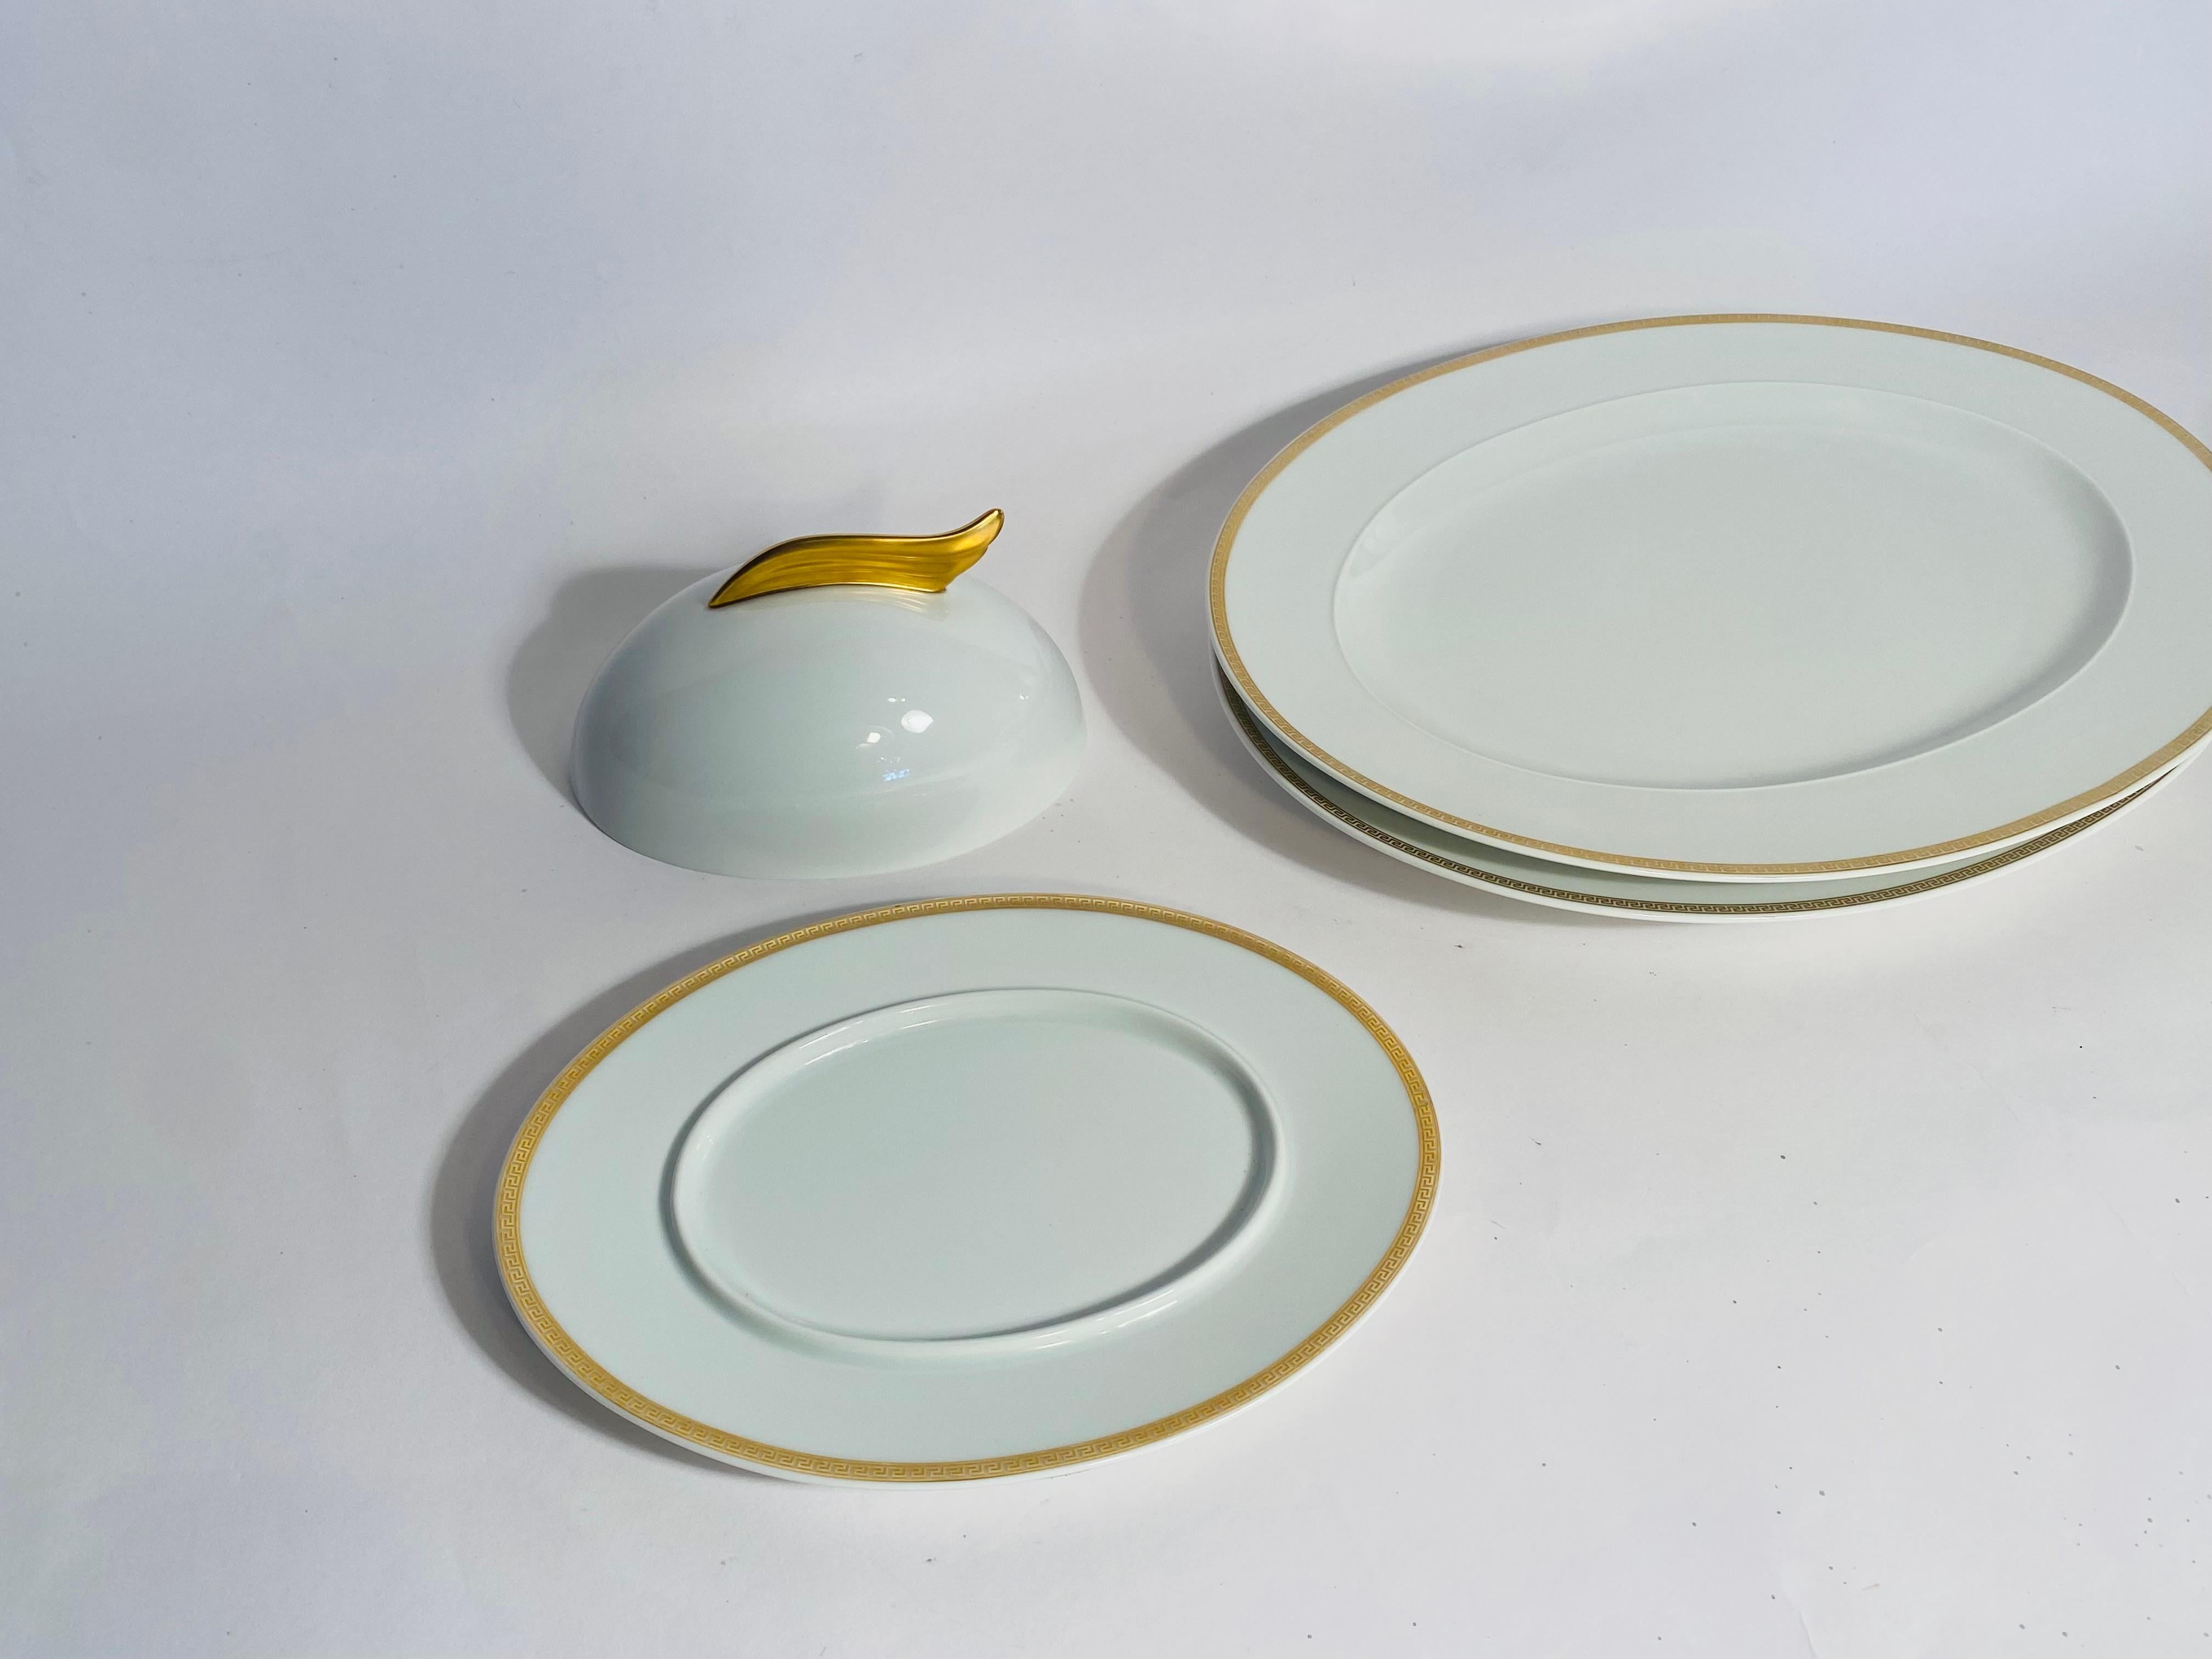 Versace Designed Crisp White Porcelain 3 Piece Serving Set with 2 Sixteen Inch Platters and One Covered Butter or Entre Dish measuring Nine and One Half Inches Long and Four and One Half Inches Wide. 
 The Medallion Meandre D'or pattern is